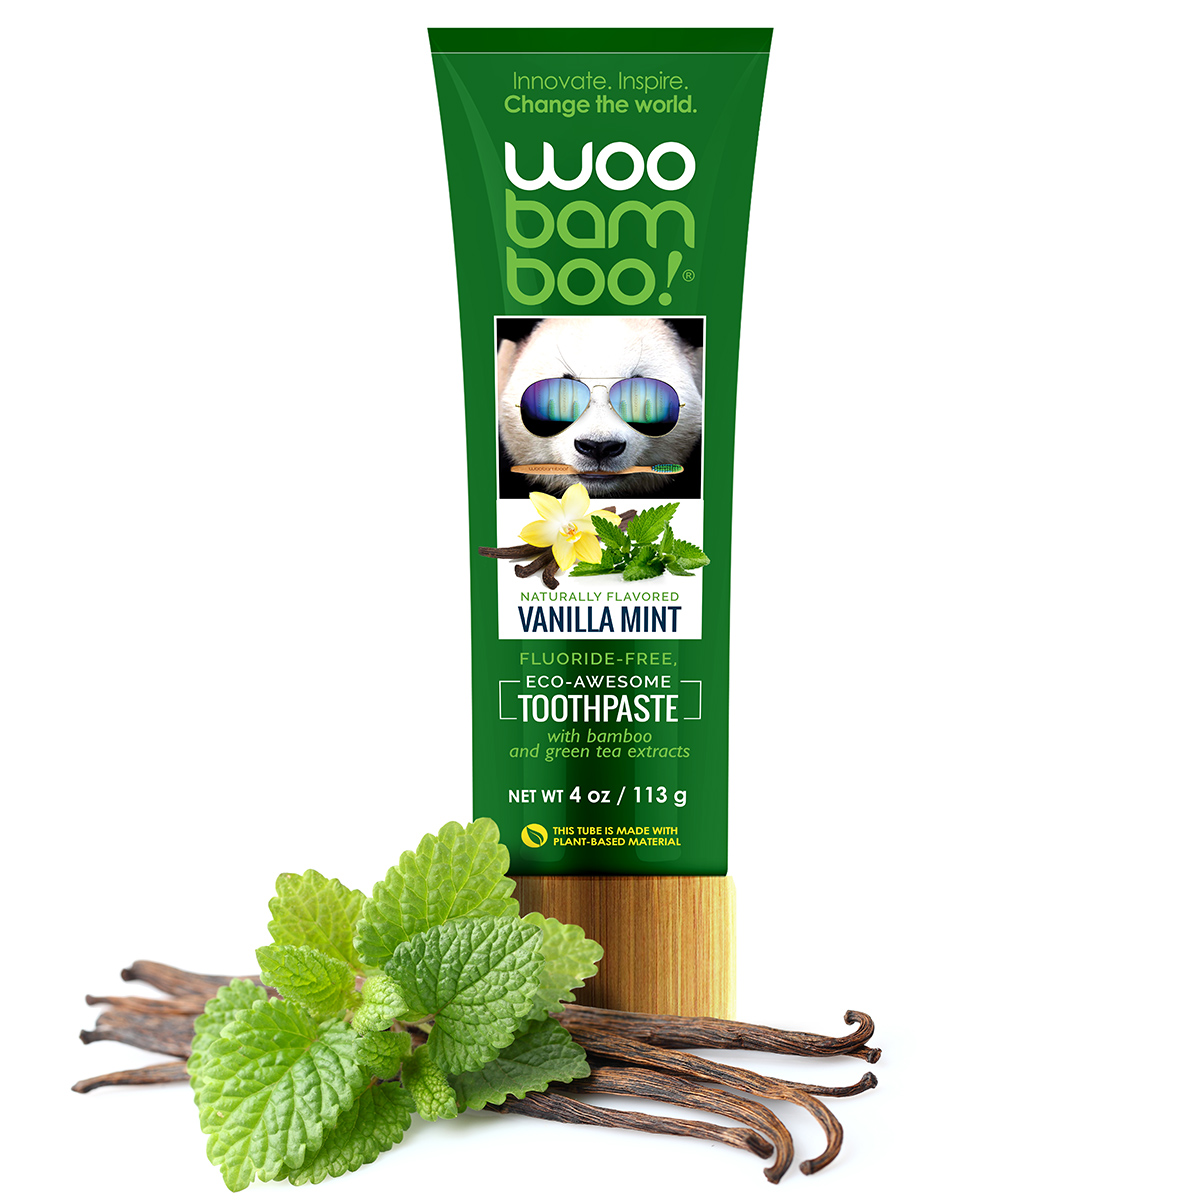 Vanilla Mint Eco-Awesome Toothpaste 113g (Currently Unavailable - Long Term Out of Stock)